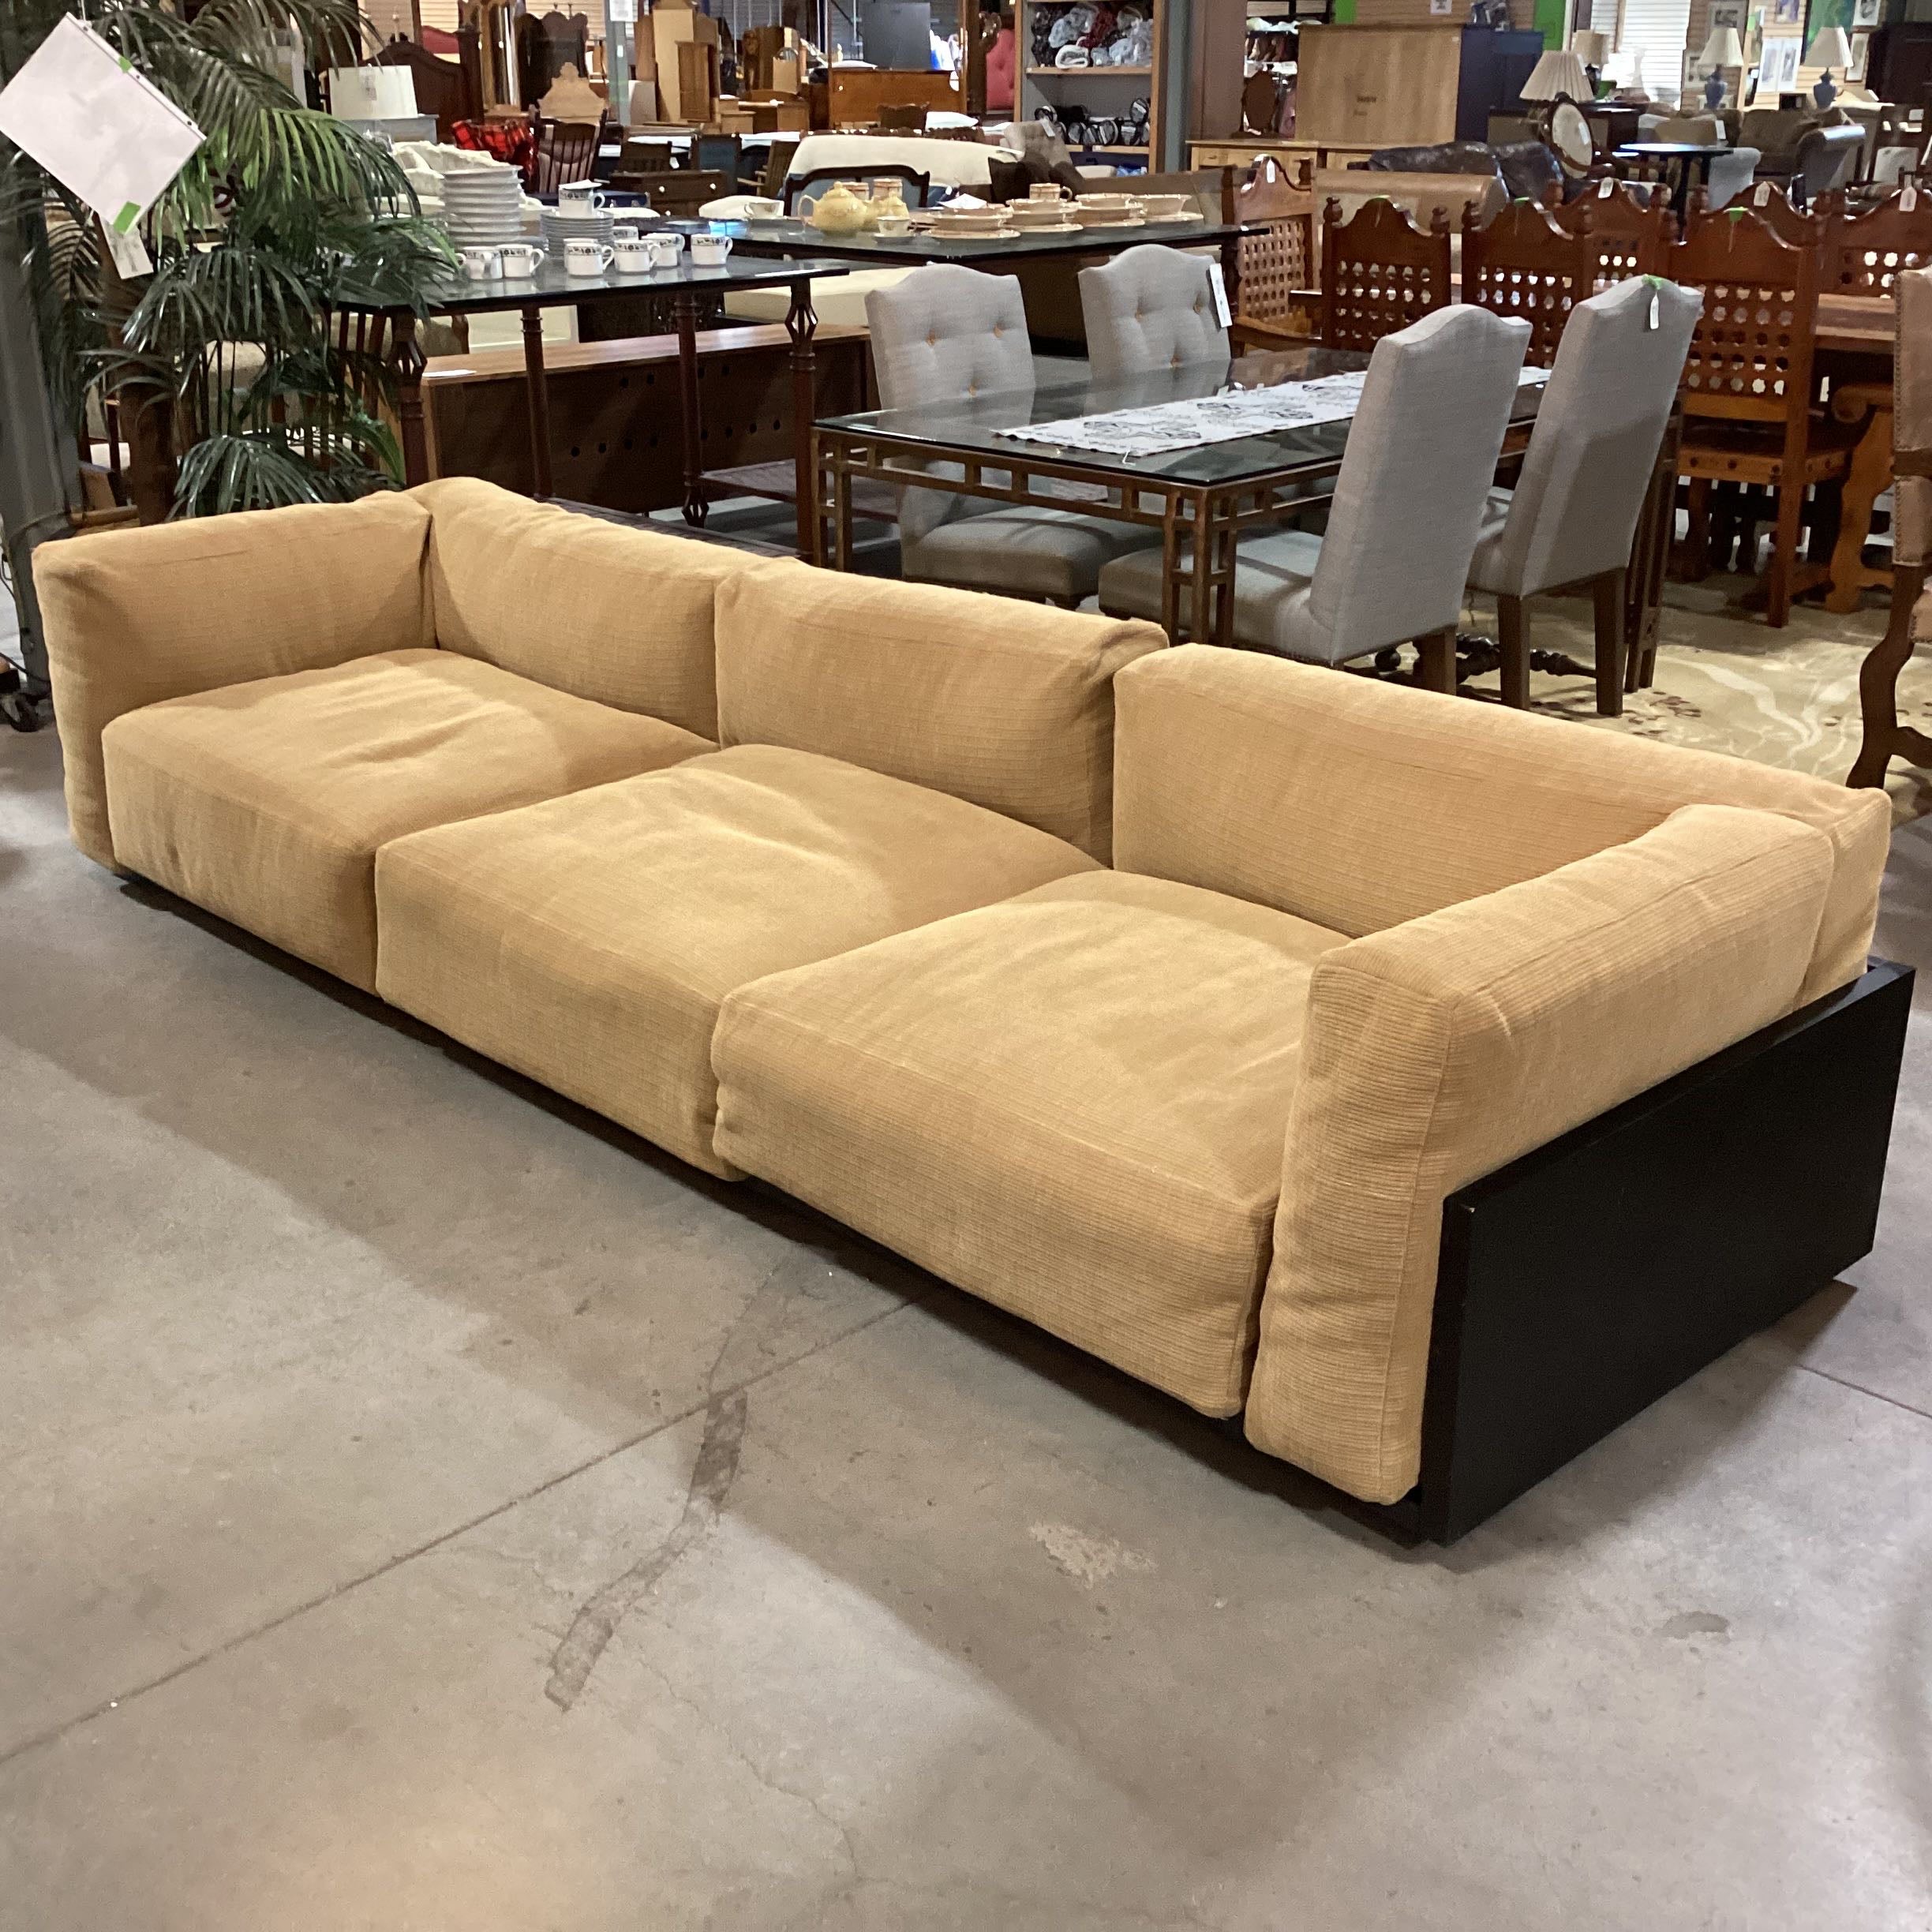 Cassina Mex Cube Gold Woven 3 Piece Seating System Sofa